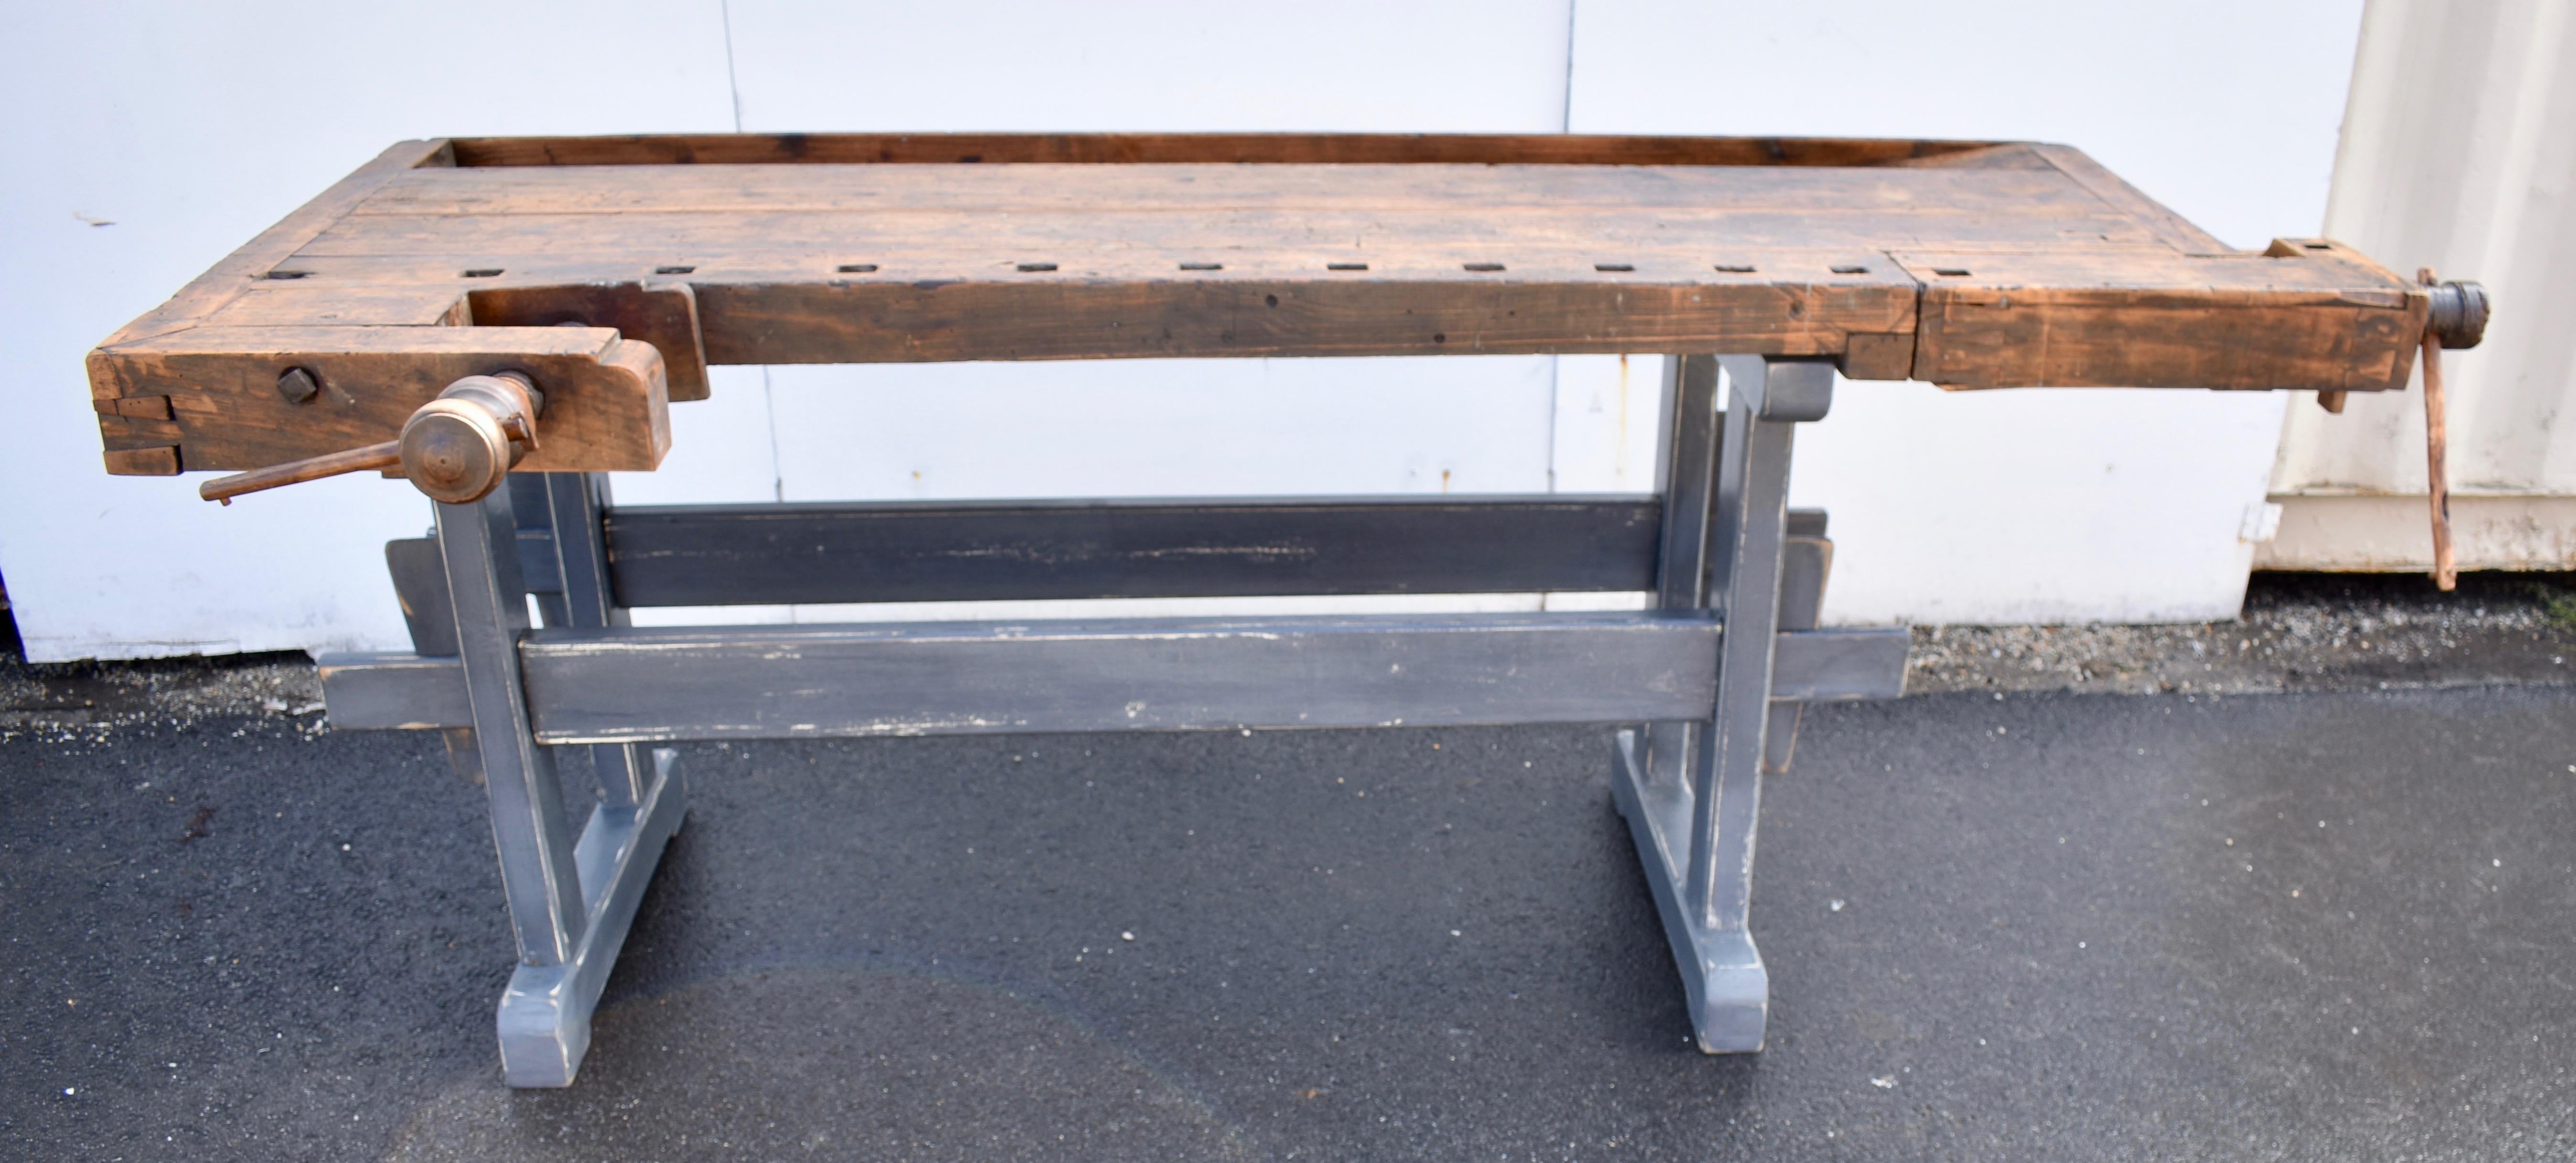 This is a beautifully chopped and gnarled carpenter’s workbench. 
The trestle-style base is made of oak and is possibly of later construction.  The uprights are hand-cut, through-tenoned and pegged top and bottom to the horizontal members. The